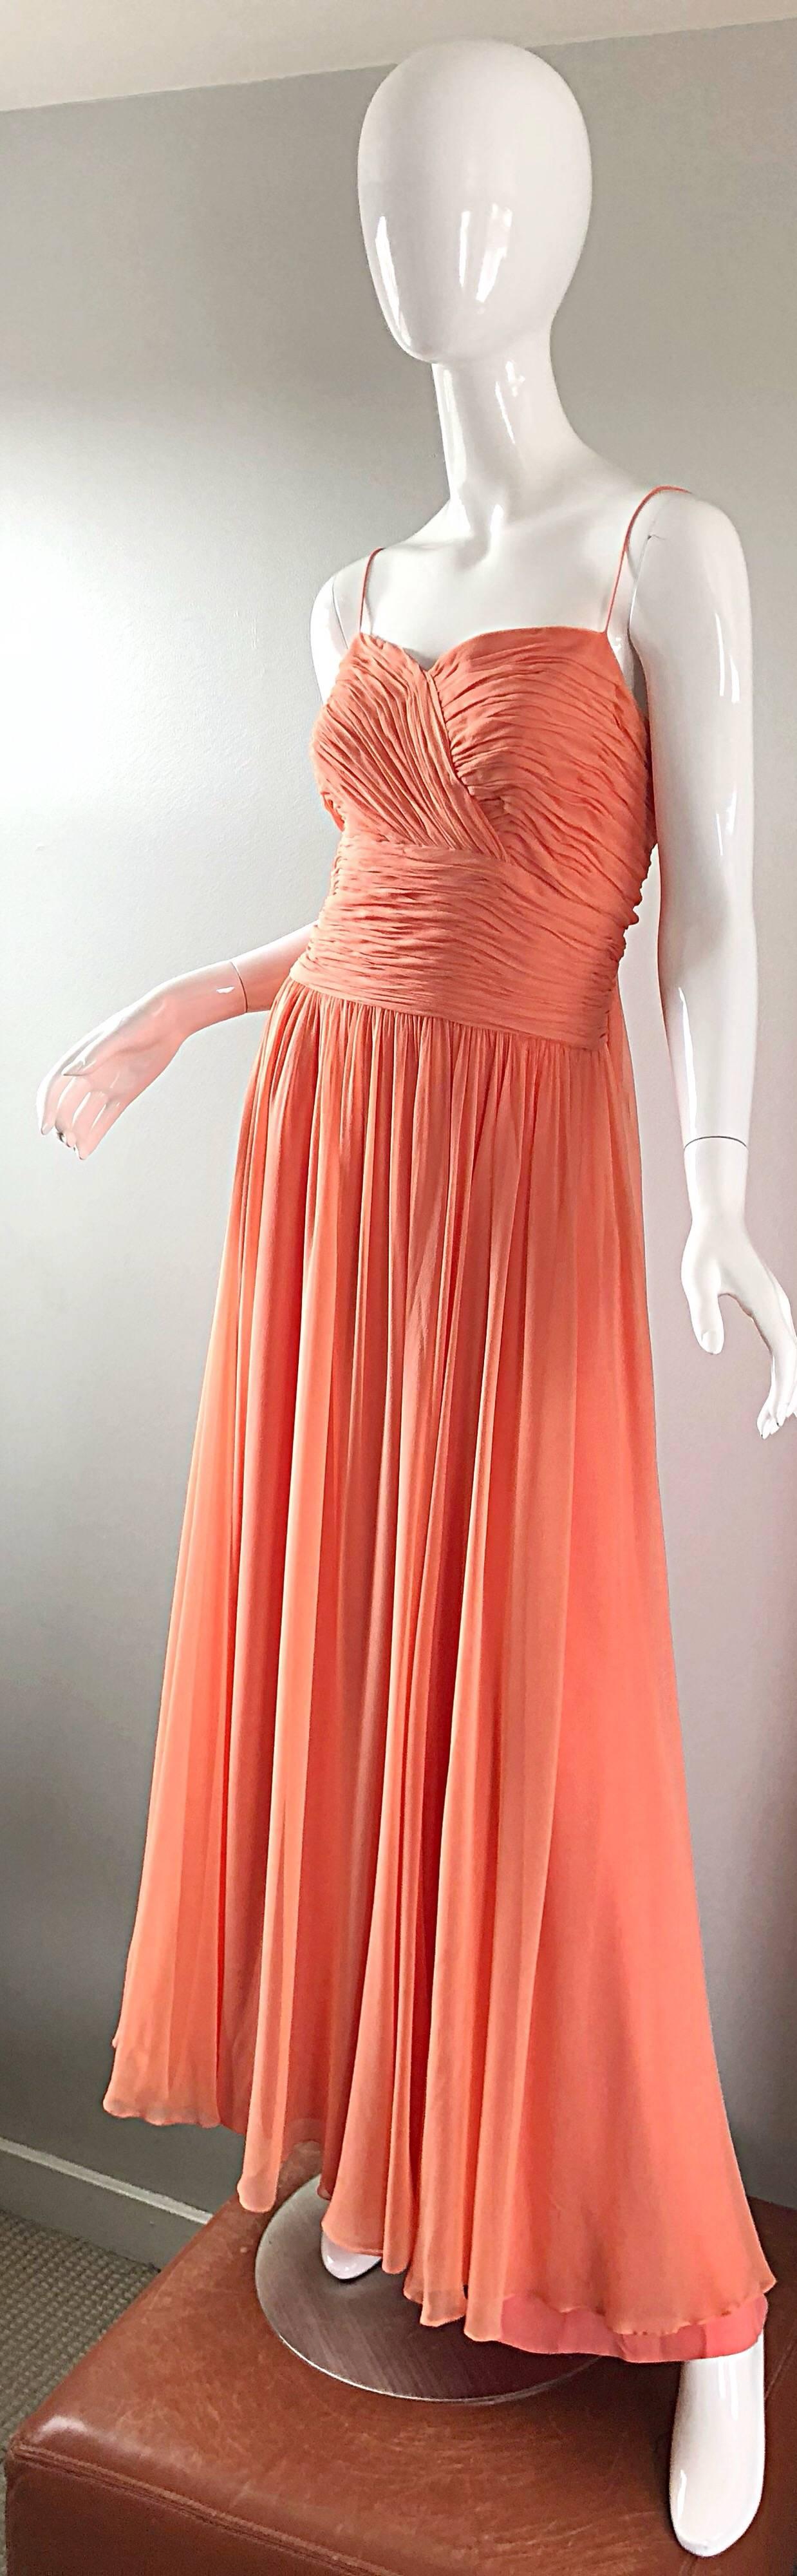 Gorgeous 1950s Saks 5th Ave. Salmon / Coral Pink Silk Chiffon Vintage 50s Gown 5